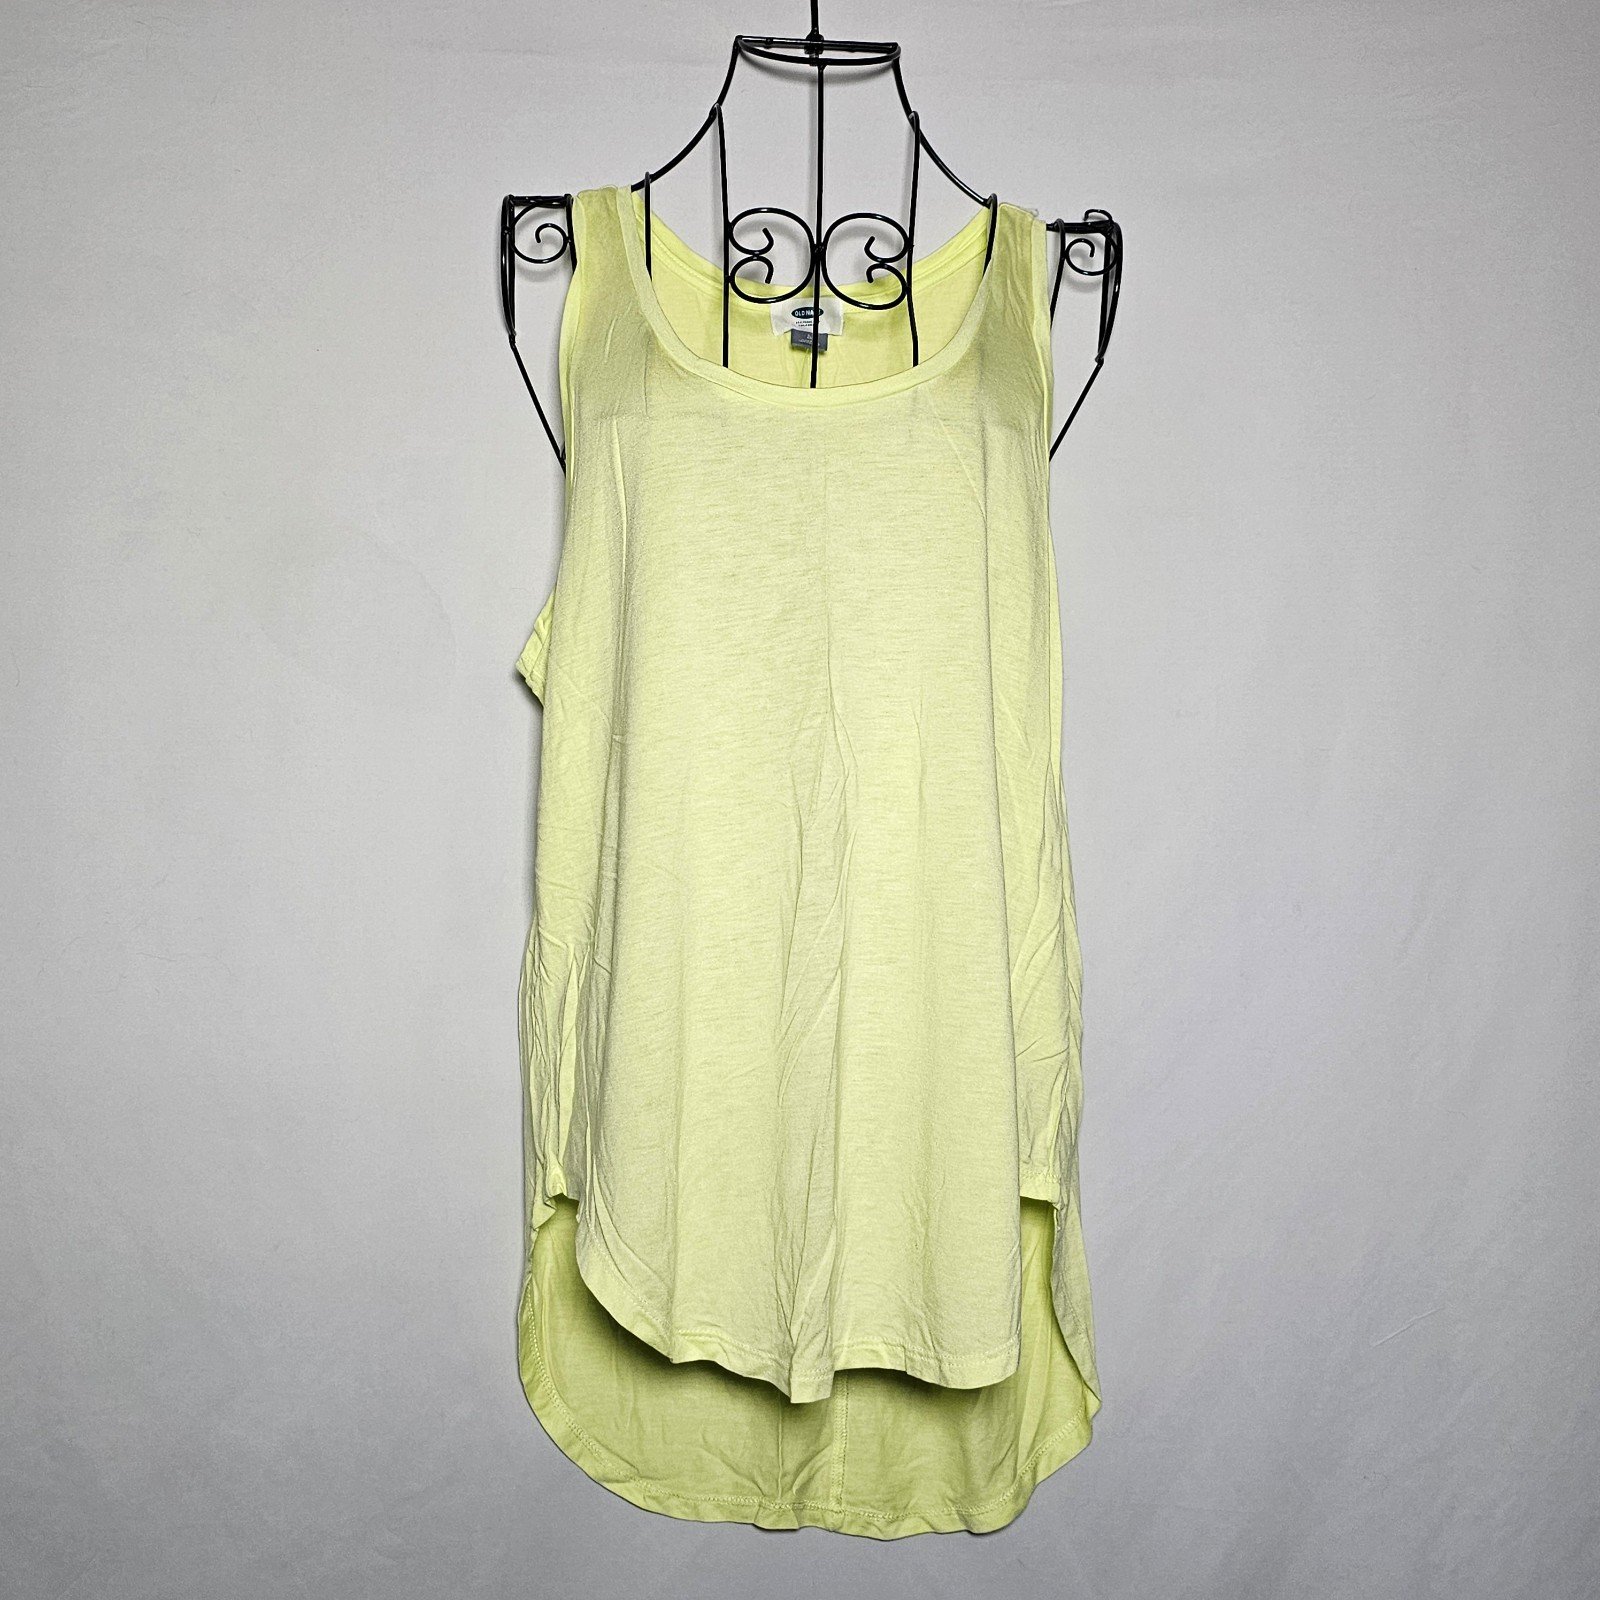 Fashion Old Navy neon yellow lightweight tank top nwt l